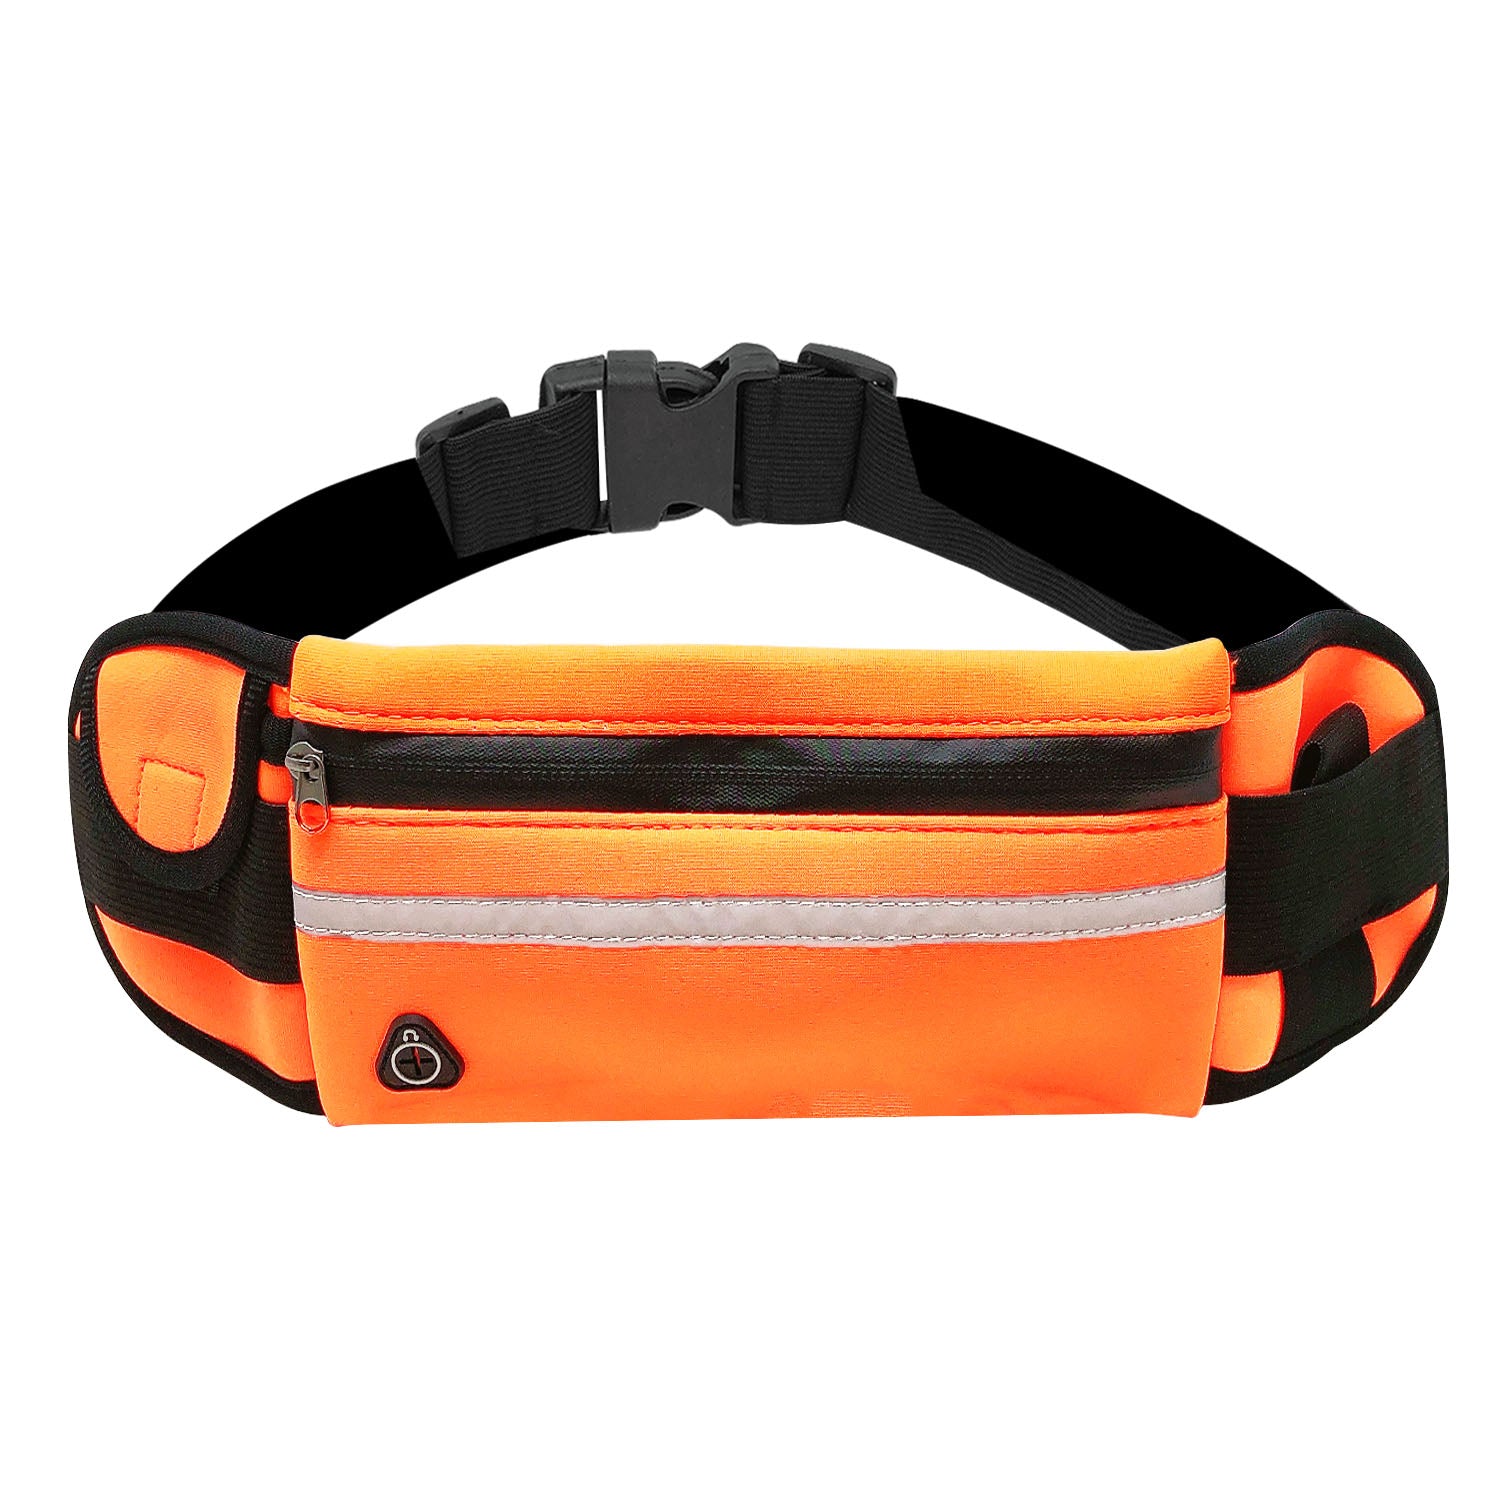 Wrapables Adjustable Neoprene Running Belt, Waterproof Fanny Pack, Workout Pouch for Running Jogging Hiking Orange